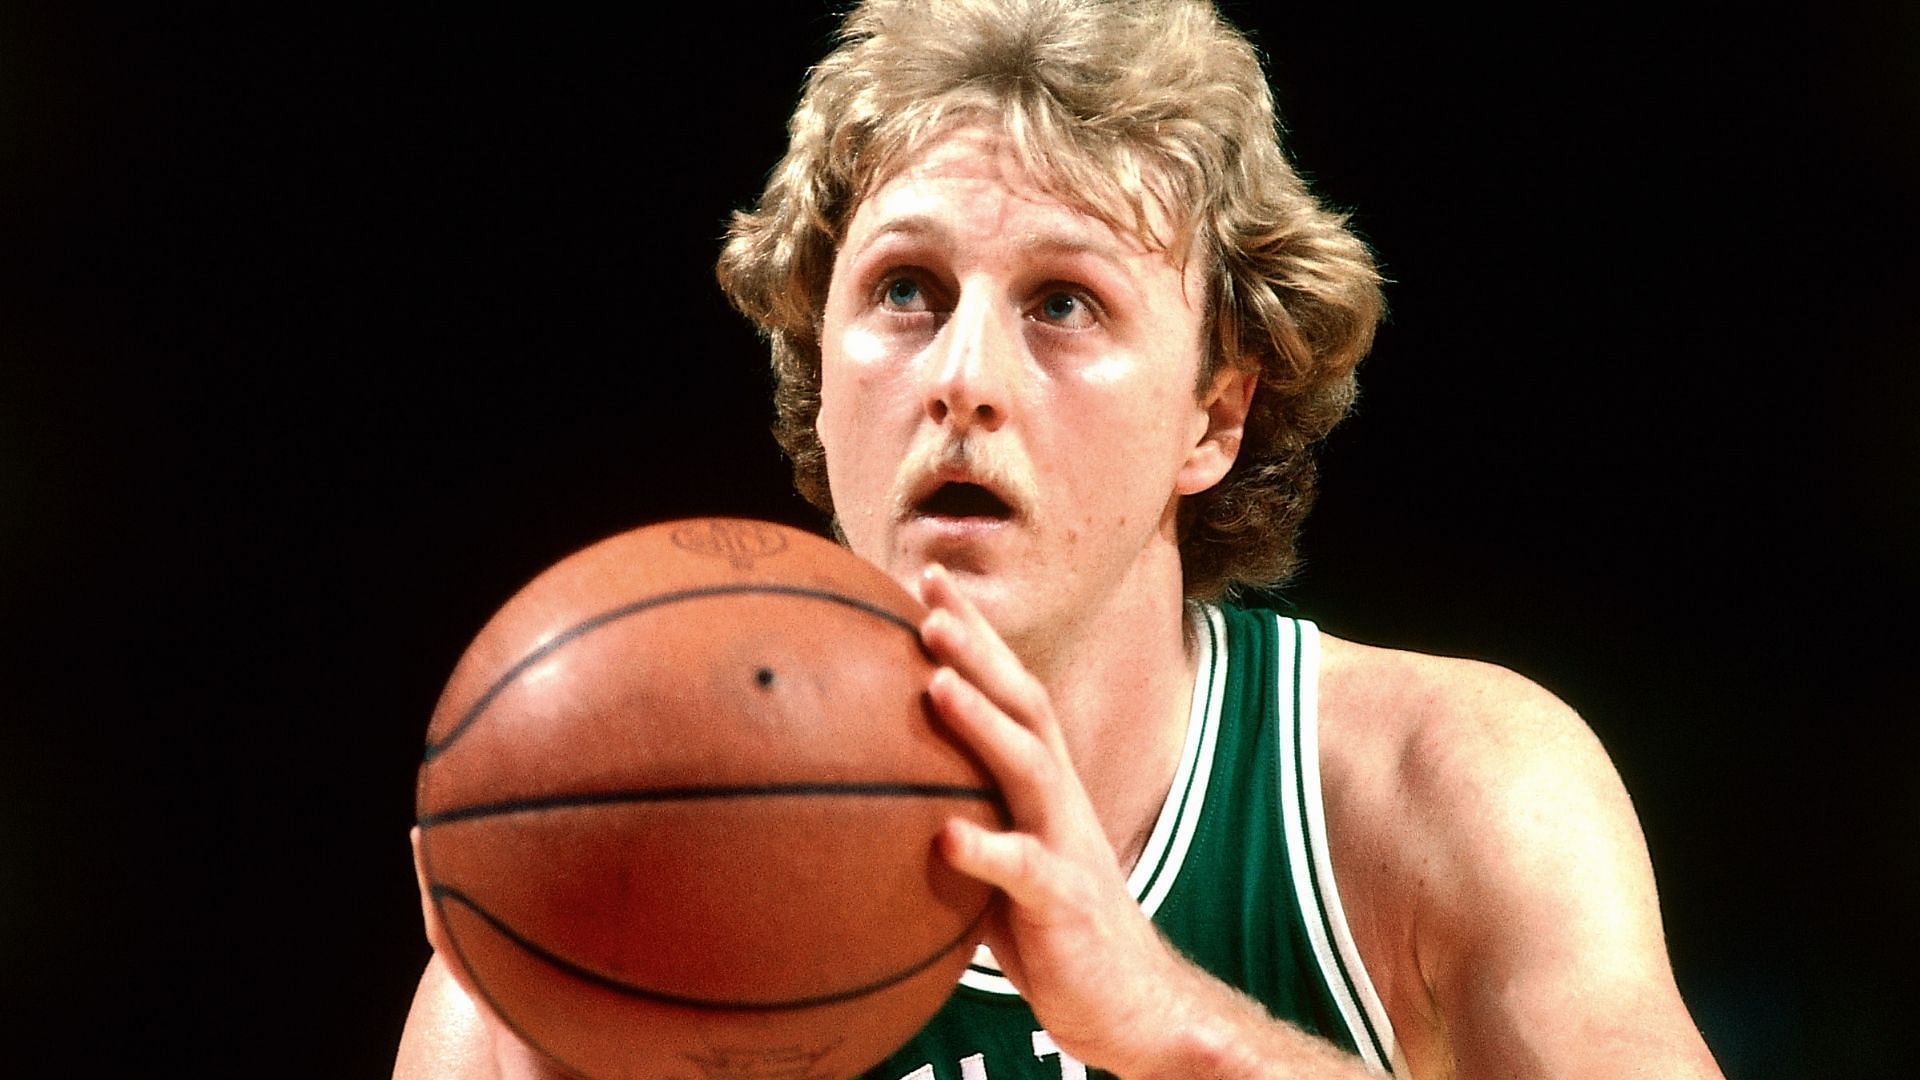 Boston Celtics legend Larry Bird was one of the all-time greats